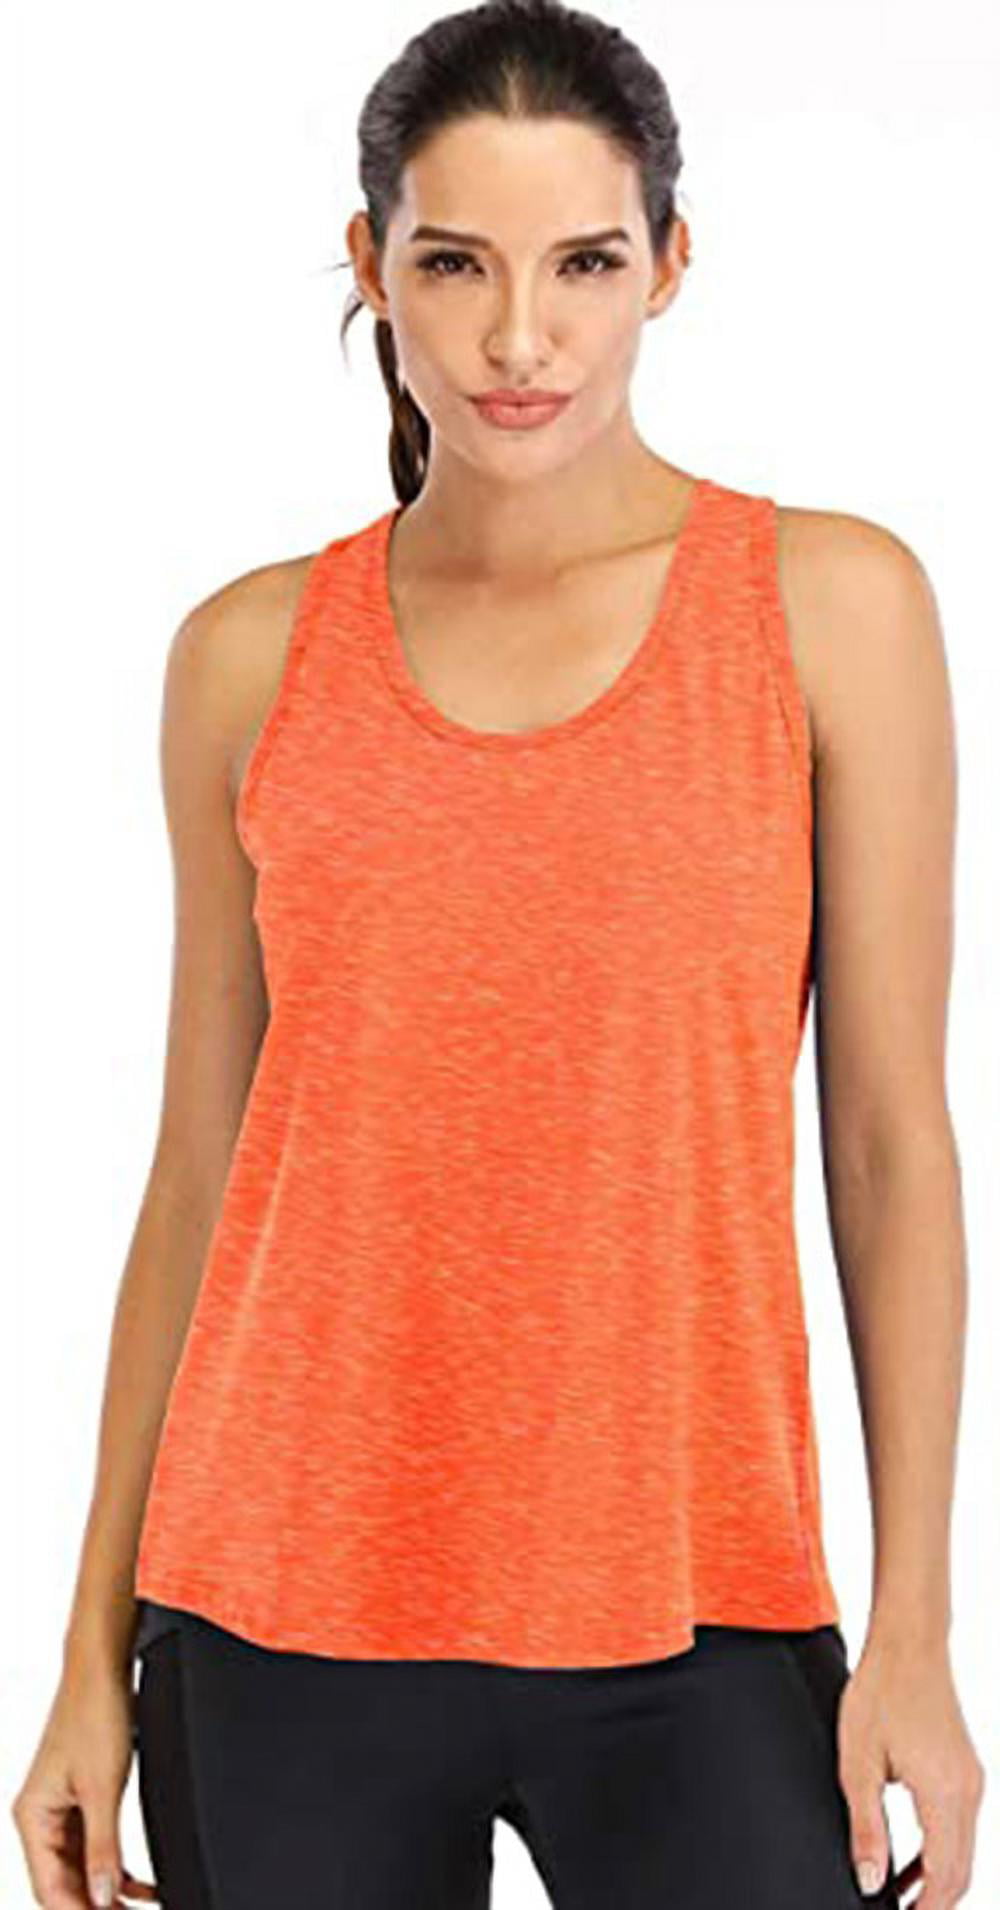  Heledok Womens Tank Tops Built in Bra Workout Racerback  Athletic Running Yoga Top Loose Fit Sports Sleeveless Shirt Orange XXL :  Clothing, Shoes & Jewelry